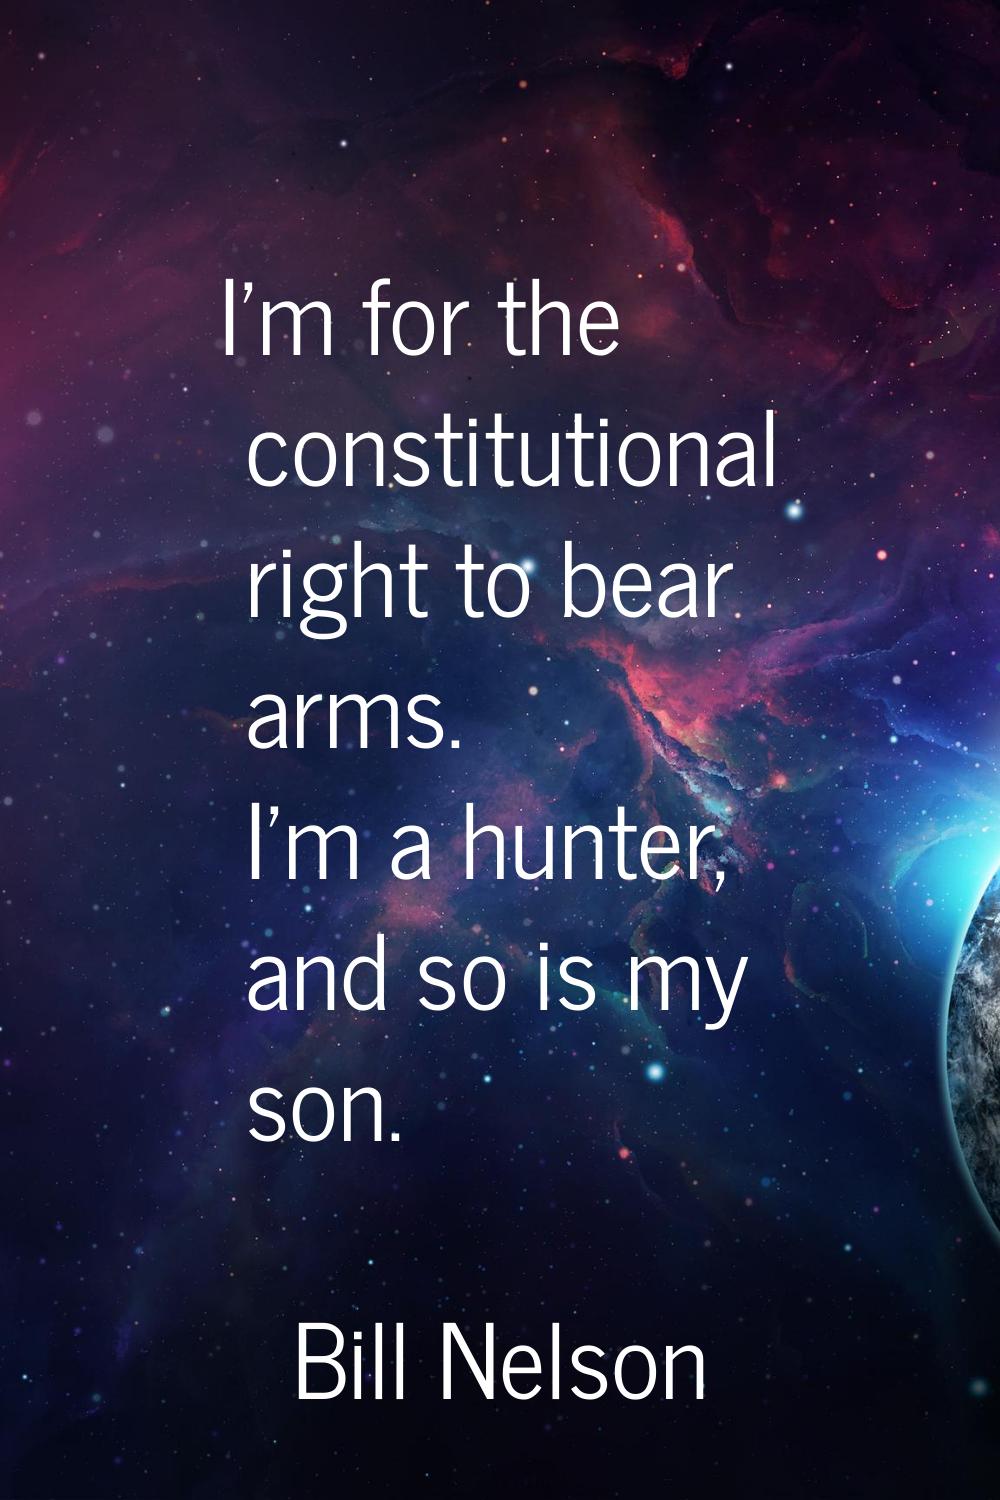 I'm for the constitutional right to bear arms. I'm a hunter, and so is my son.